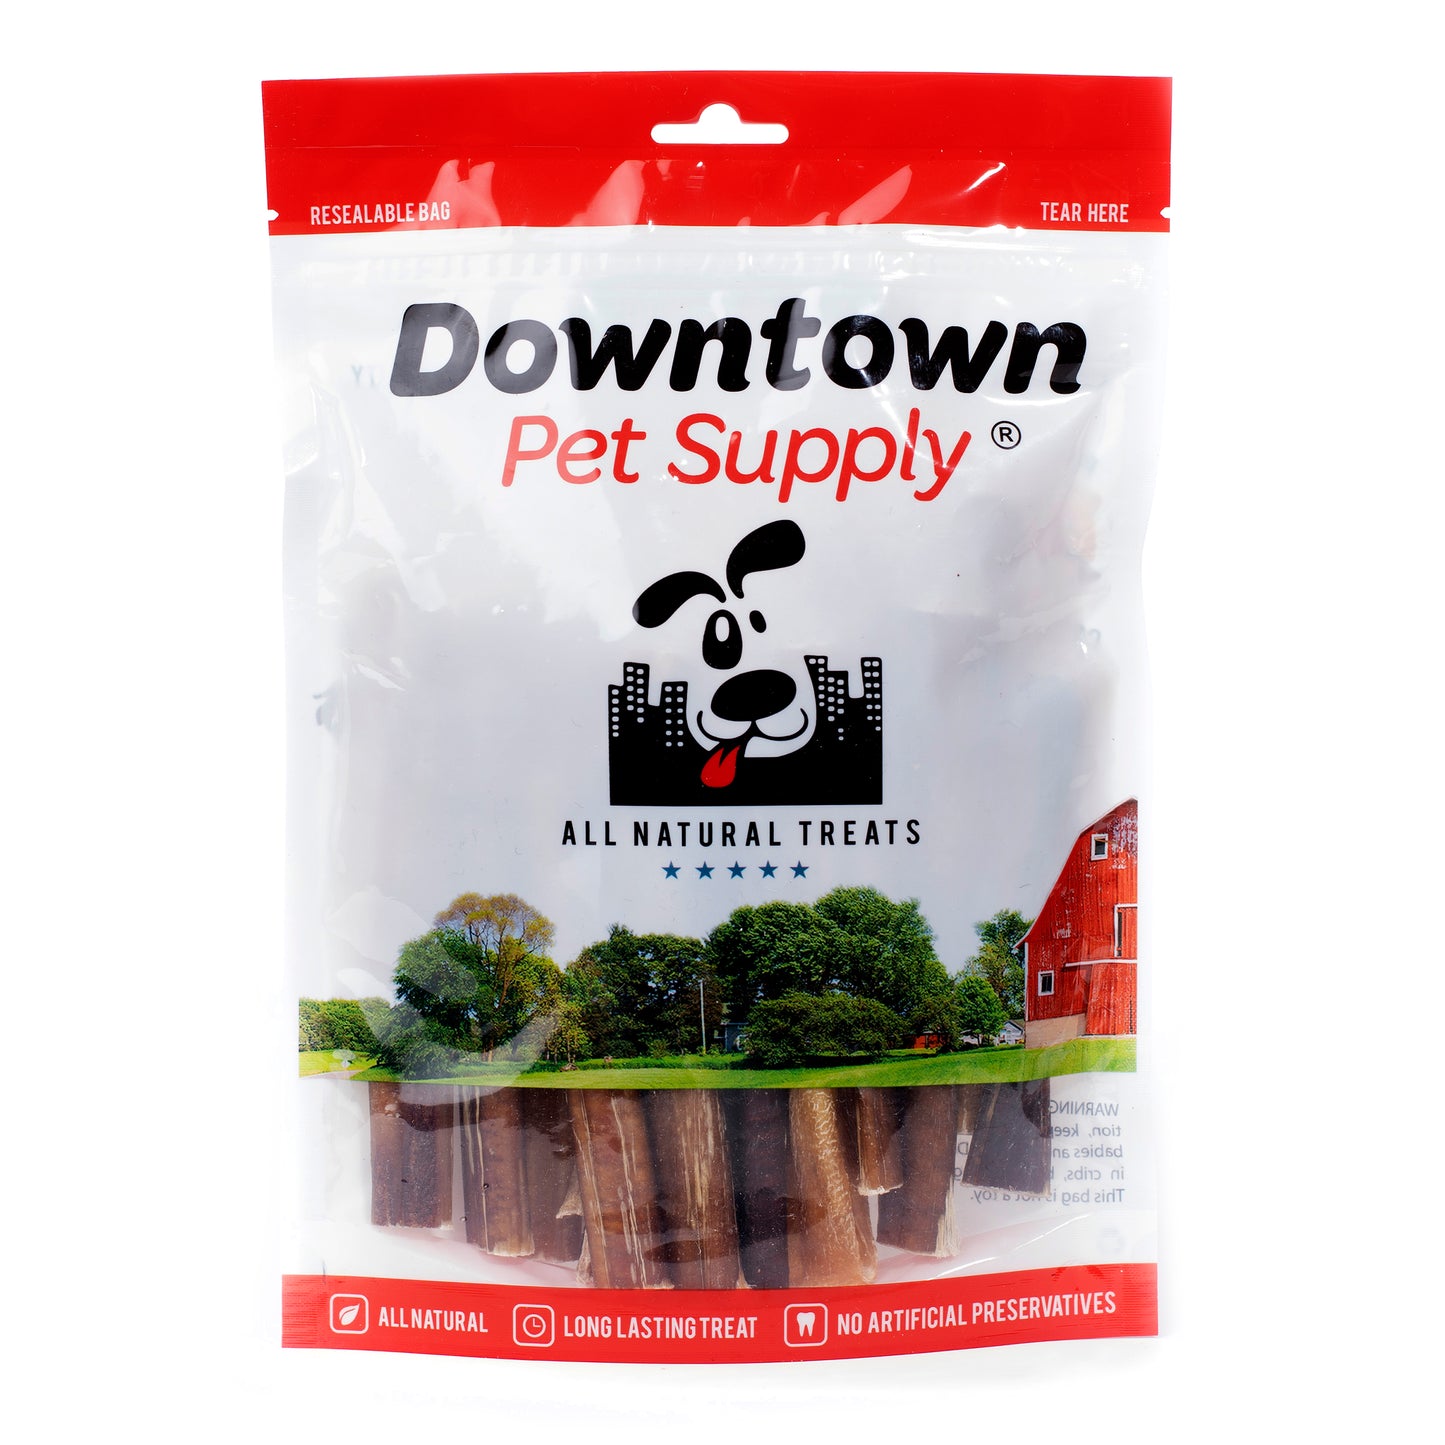 Downtown Pet Supply 4 and 5 inch Bully Sticks for Dogs (Bulk Bags by Weight) - Natural Dog Dental Chew Treats, High in Protein, Great Alternative to Rawhides